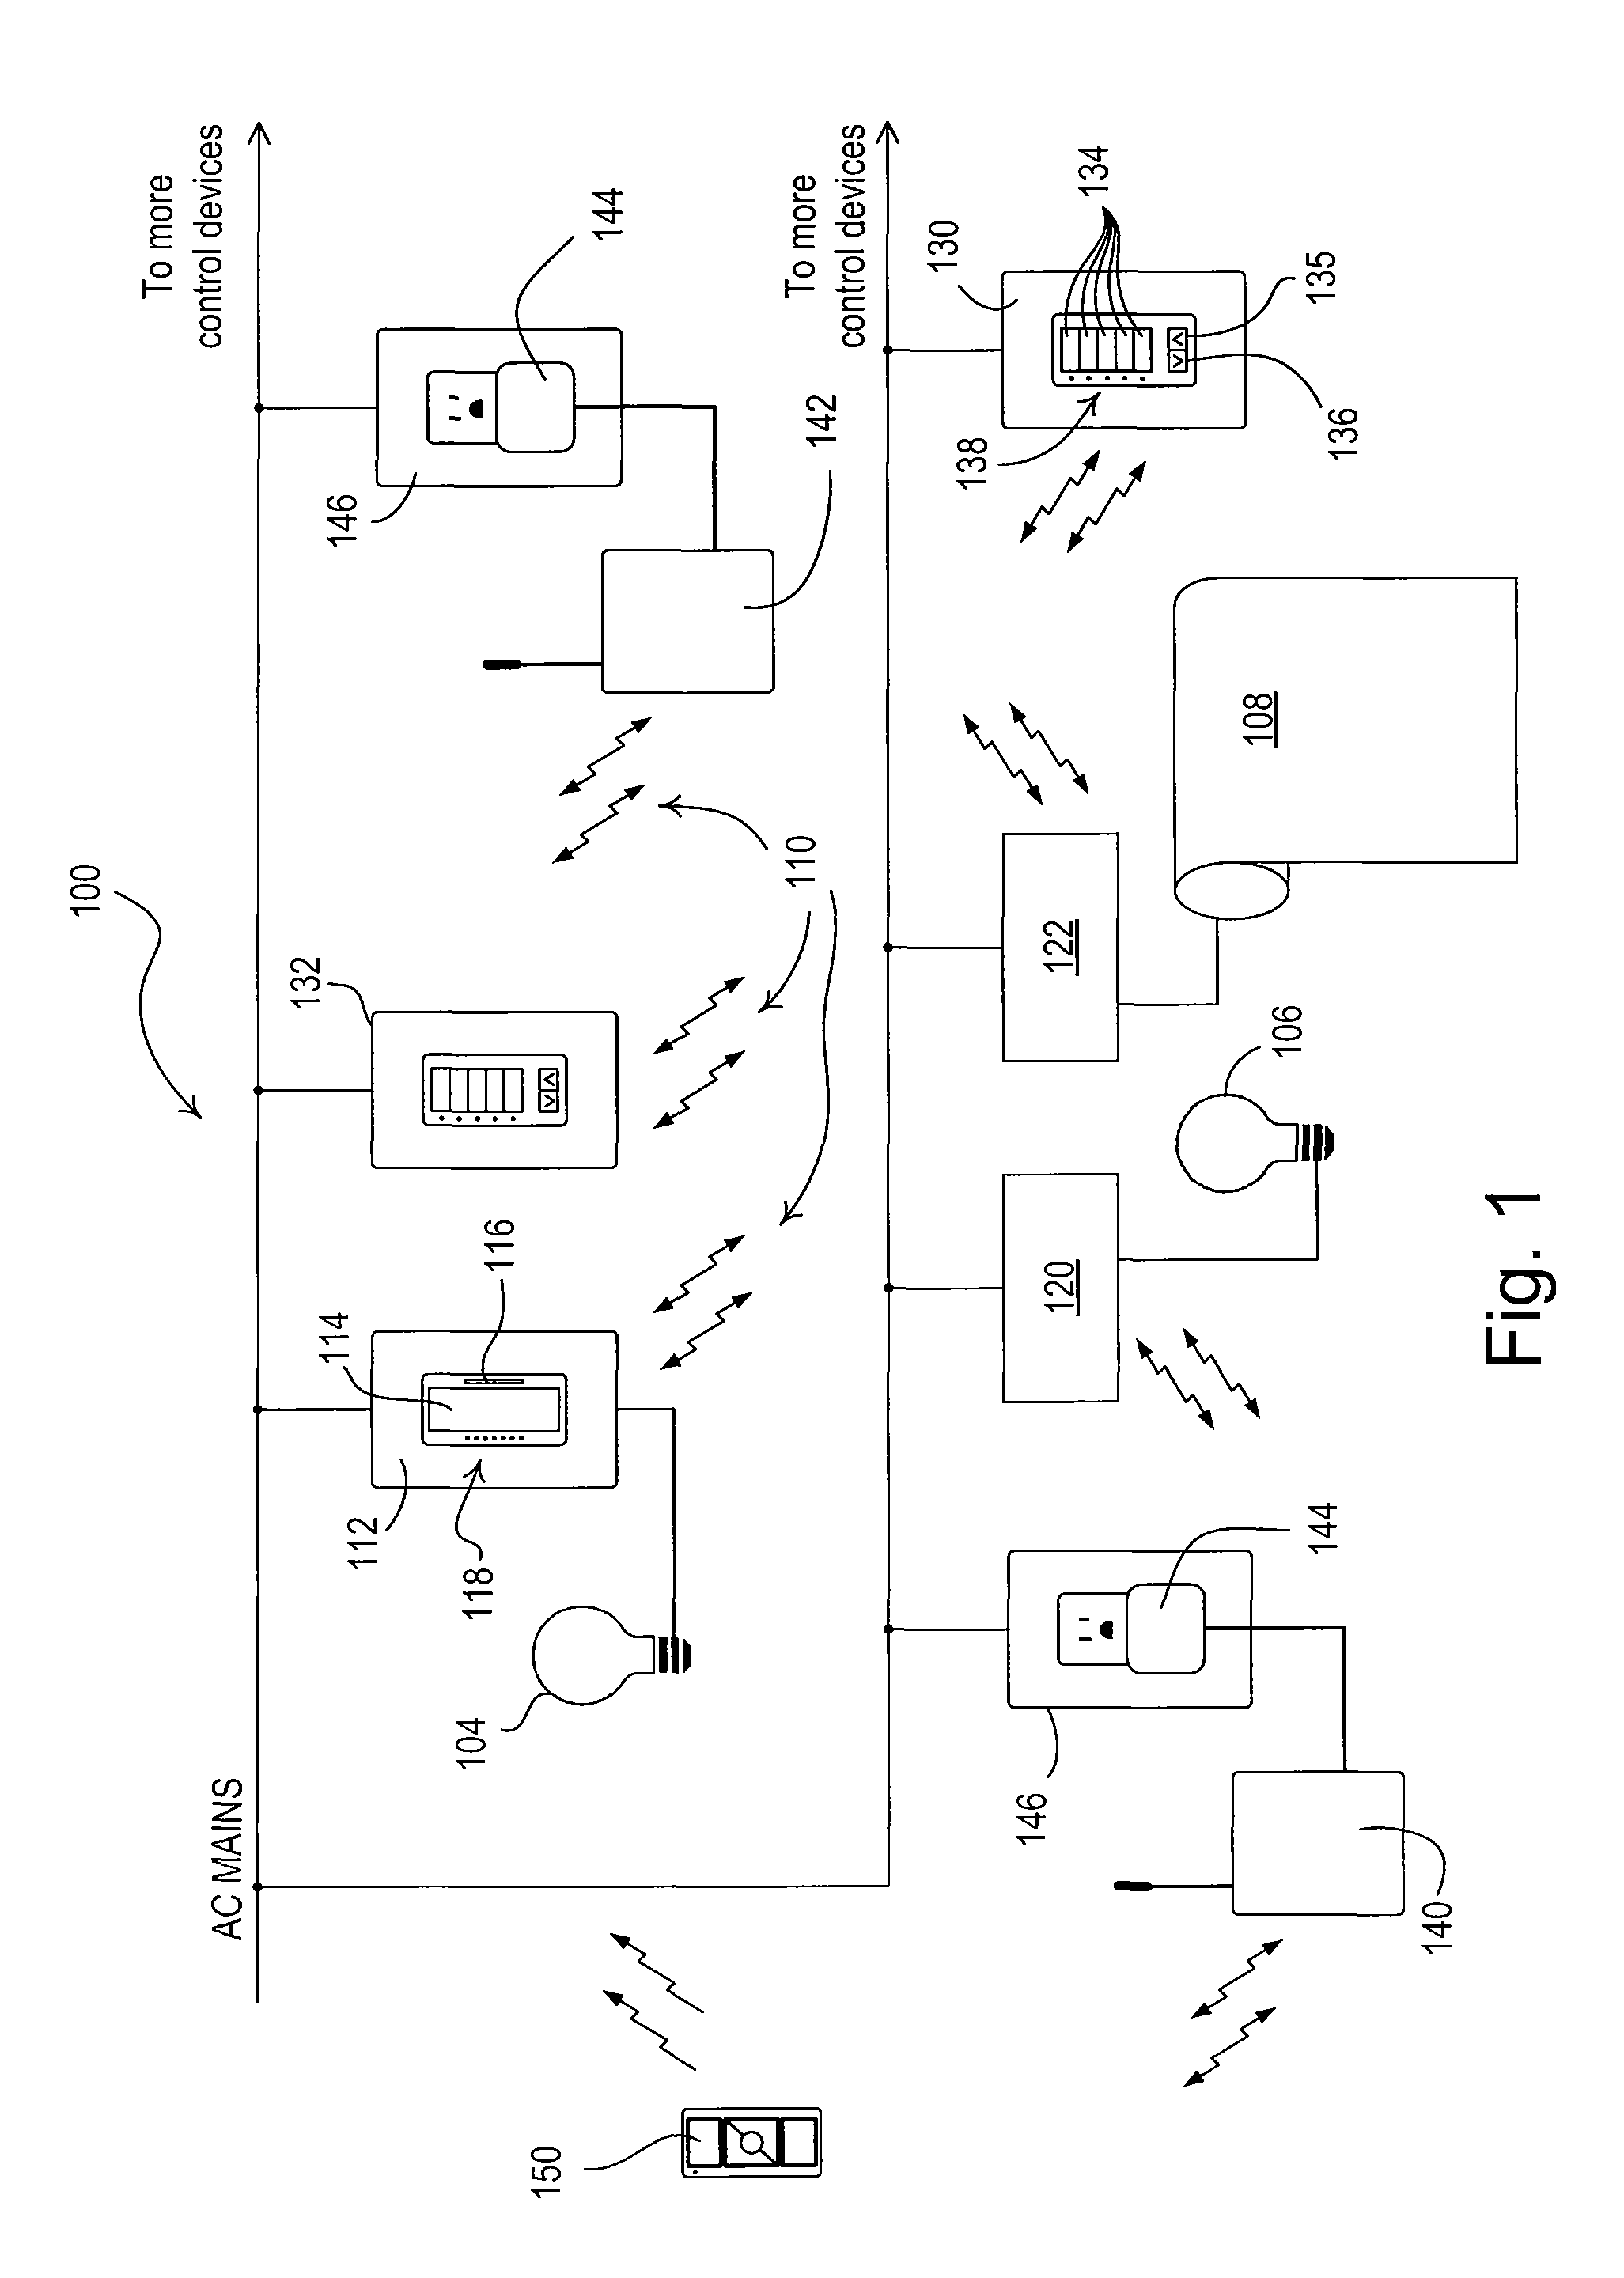 Method of configuring a two-way wireless load control system having one-way wireless remote control devices